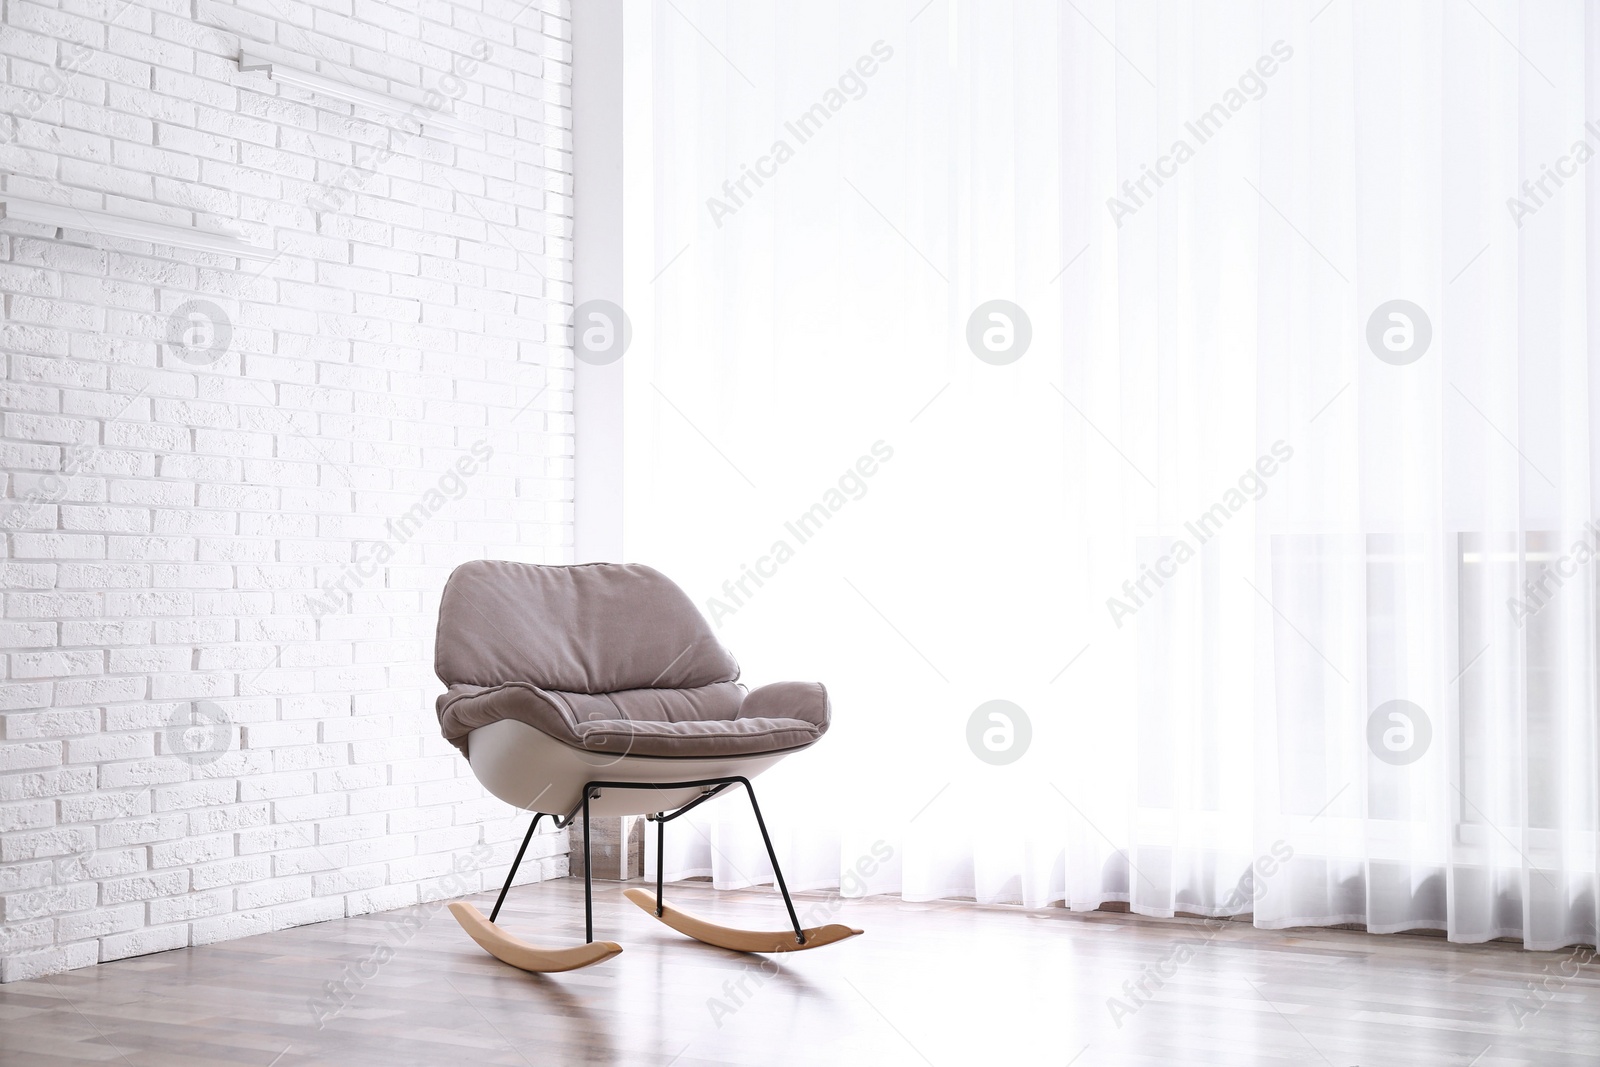 Photo of Comfortable rocking chair near white brick wall. Space for text